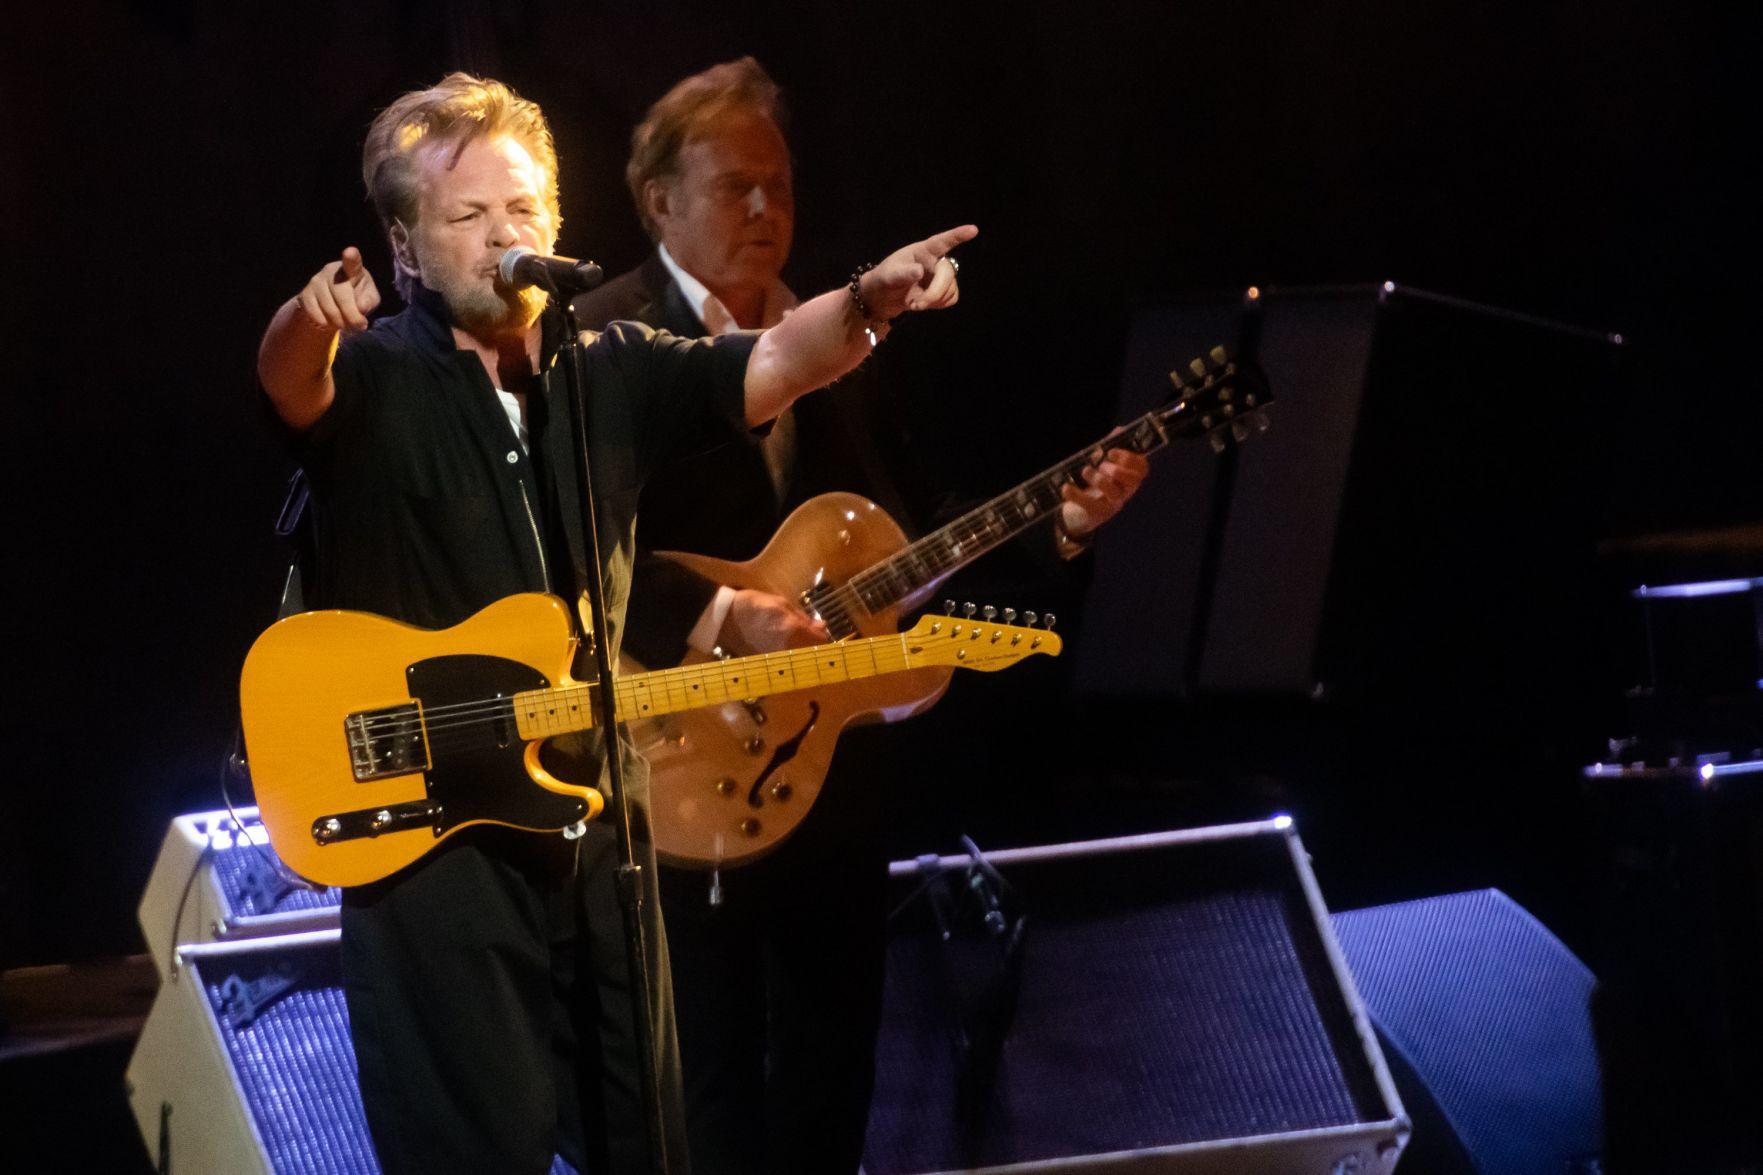 John Mellencamp connects with fans in a show of hits, covers and quiet